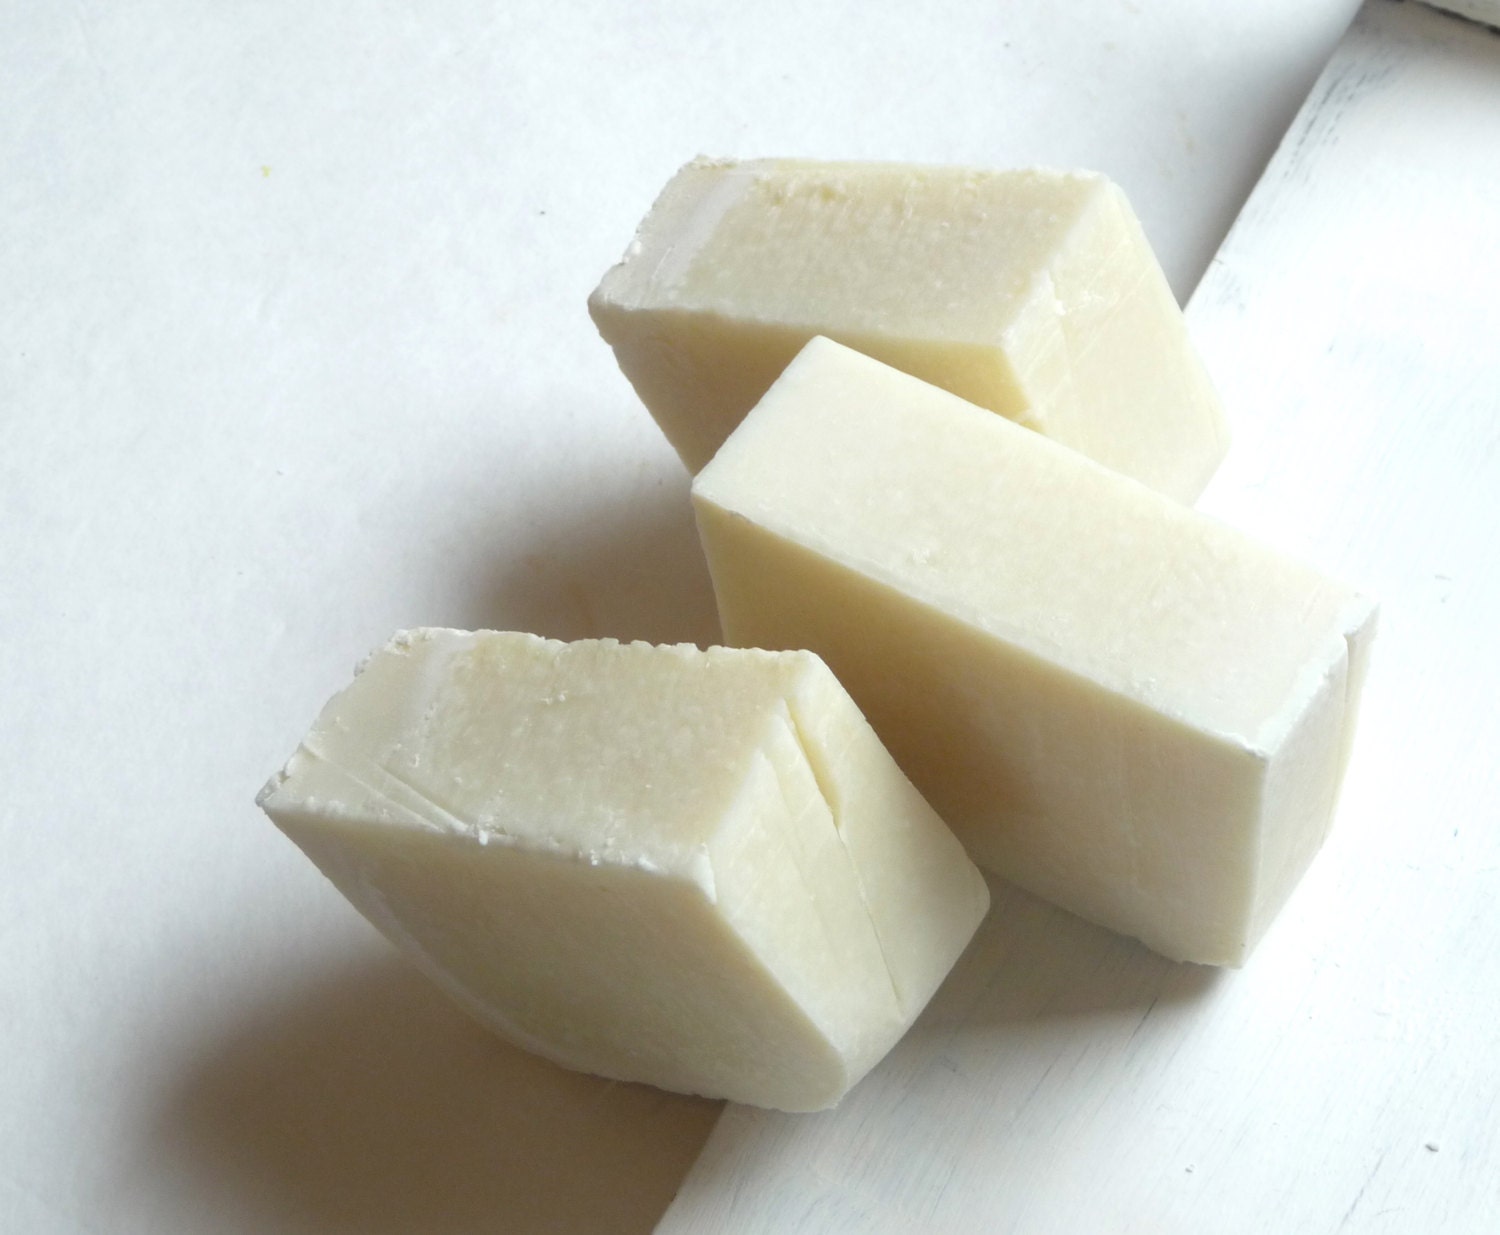 Fragrance Free Plain Soap, Cold Process Olive Oil and Coconut Oil Soap - Mylana